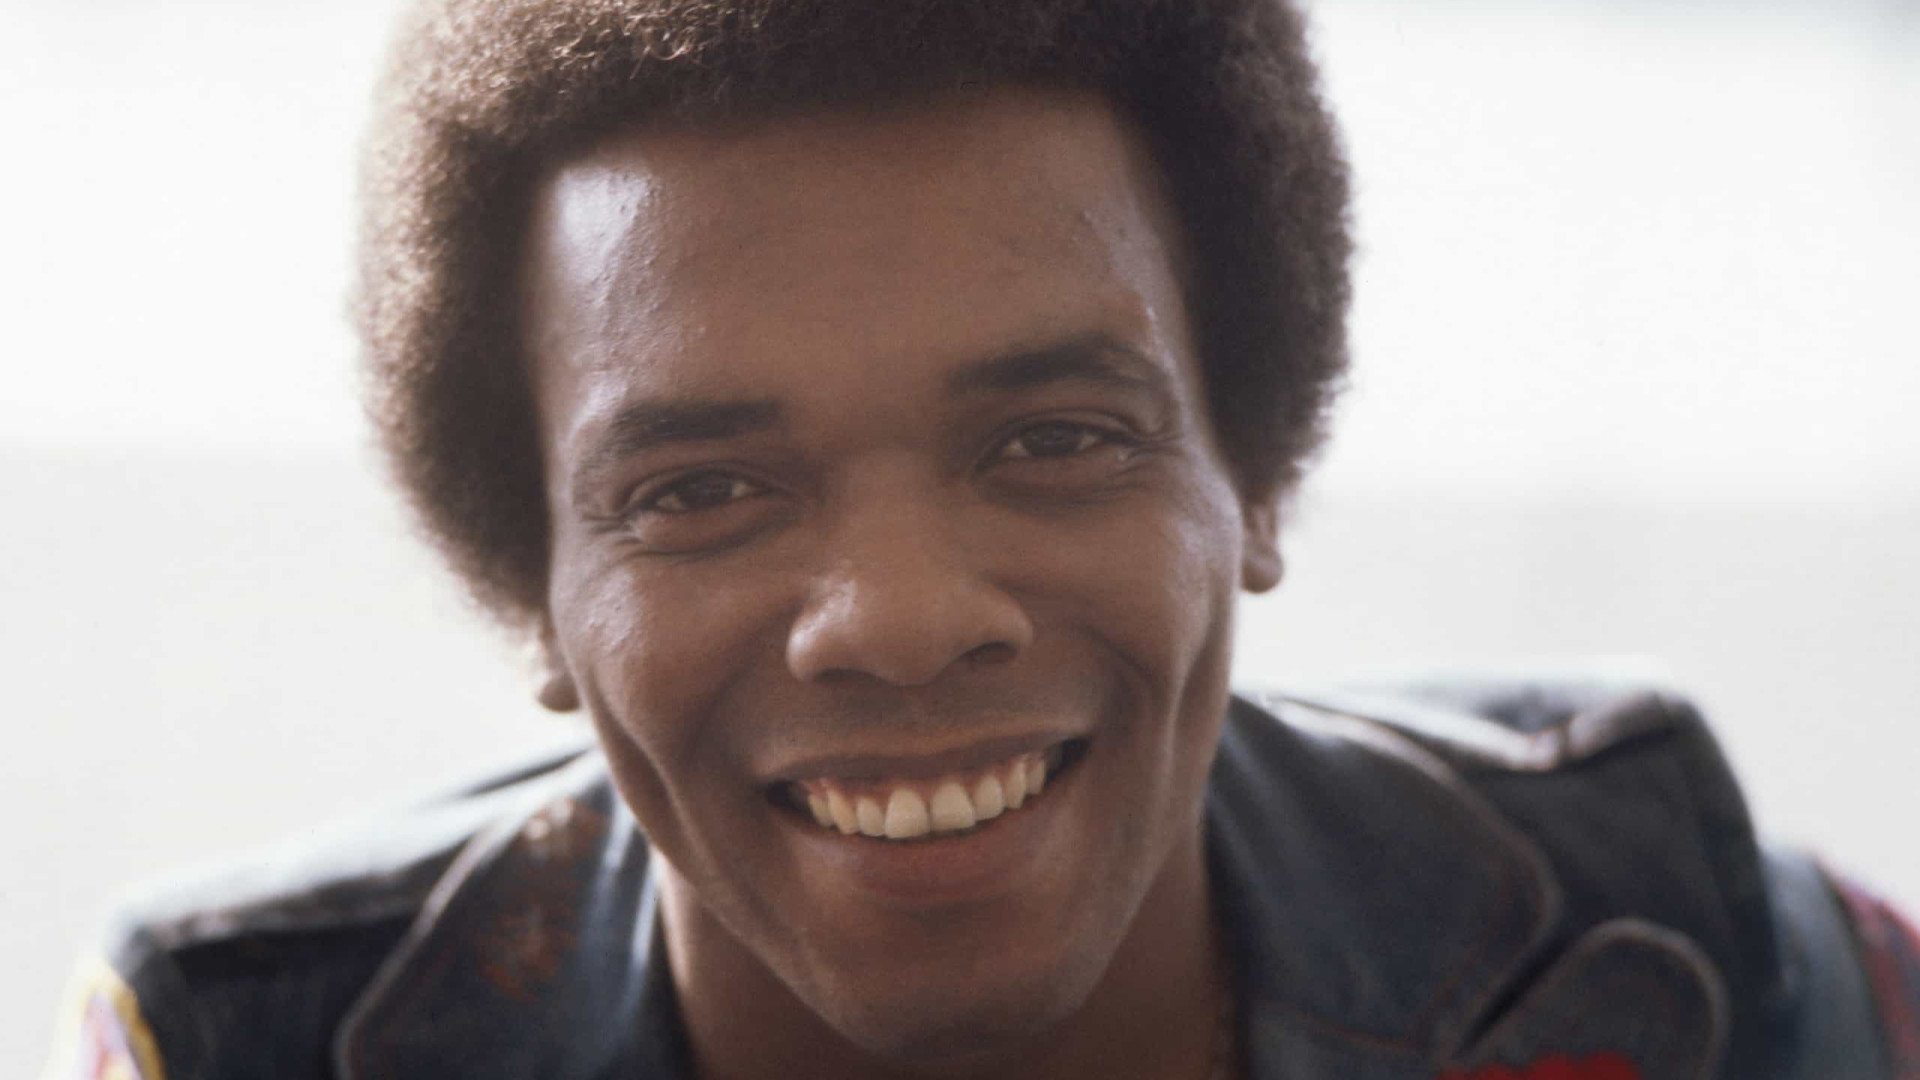 Johnny Nash, intérprete de 'I Can See Clearly Now', morre aos 80 anos